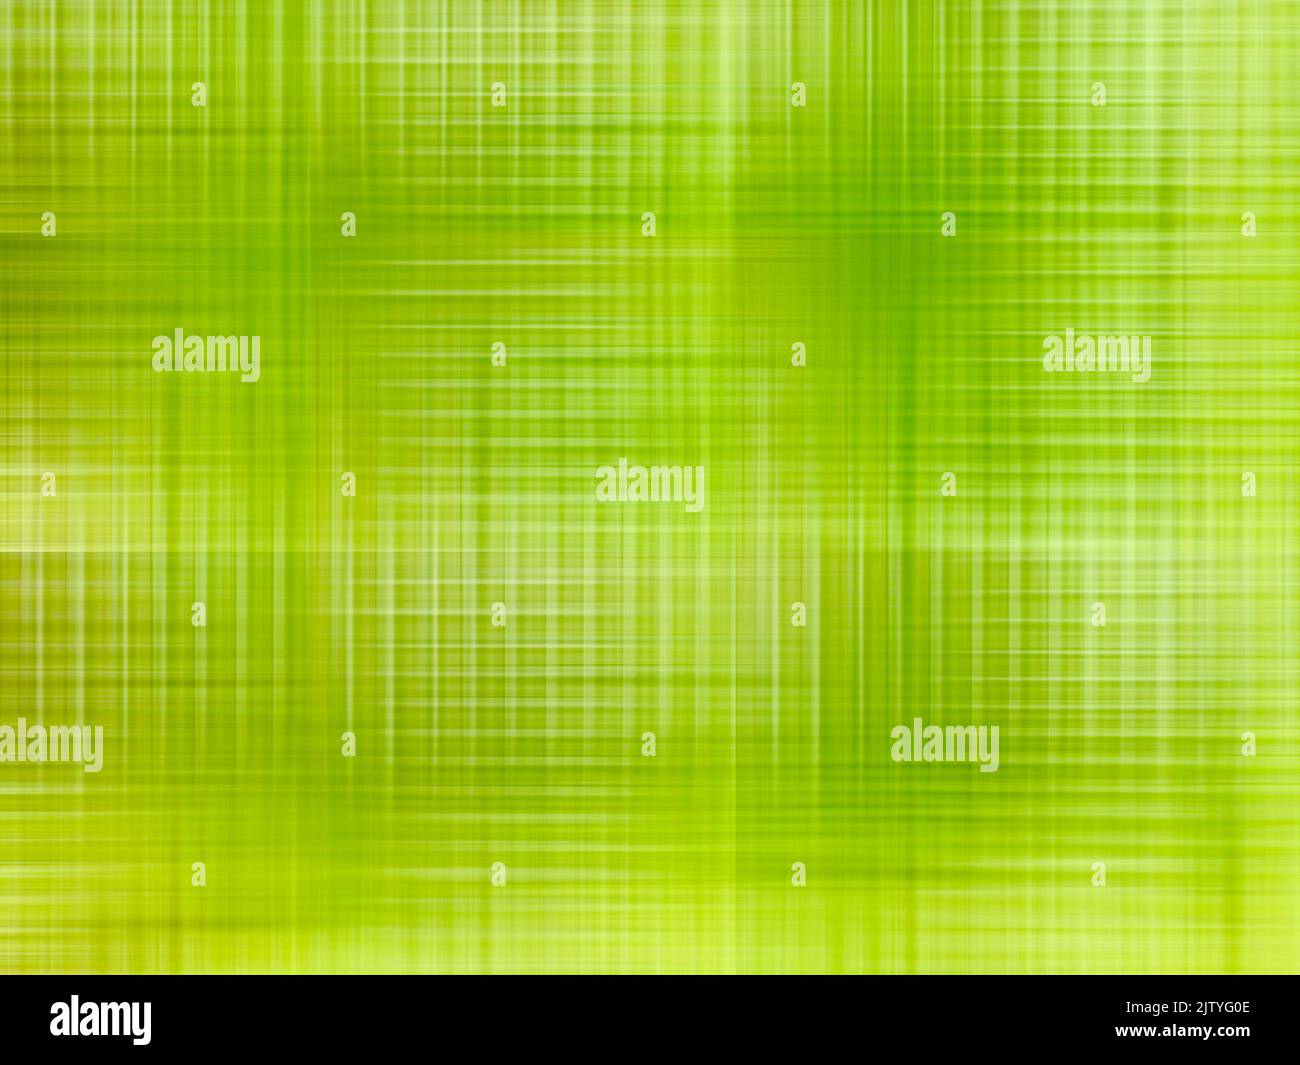 Wire frame shape of wave abstract background, green background concept. Stock Photo